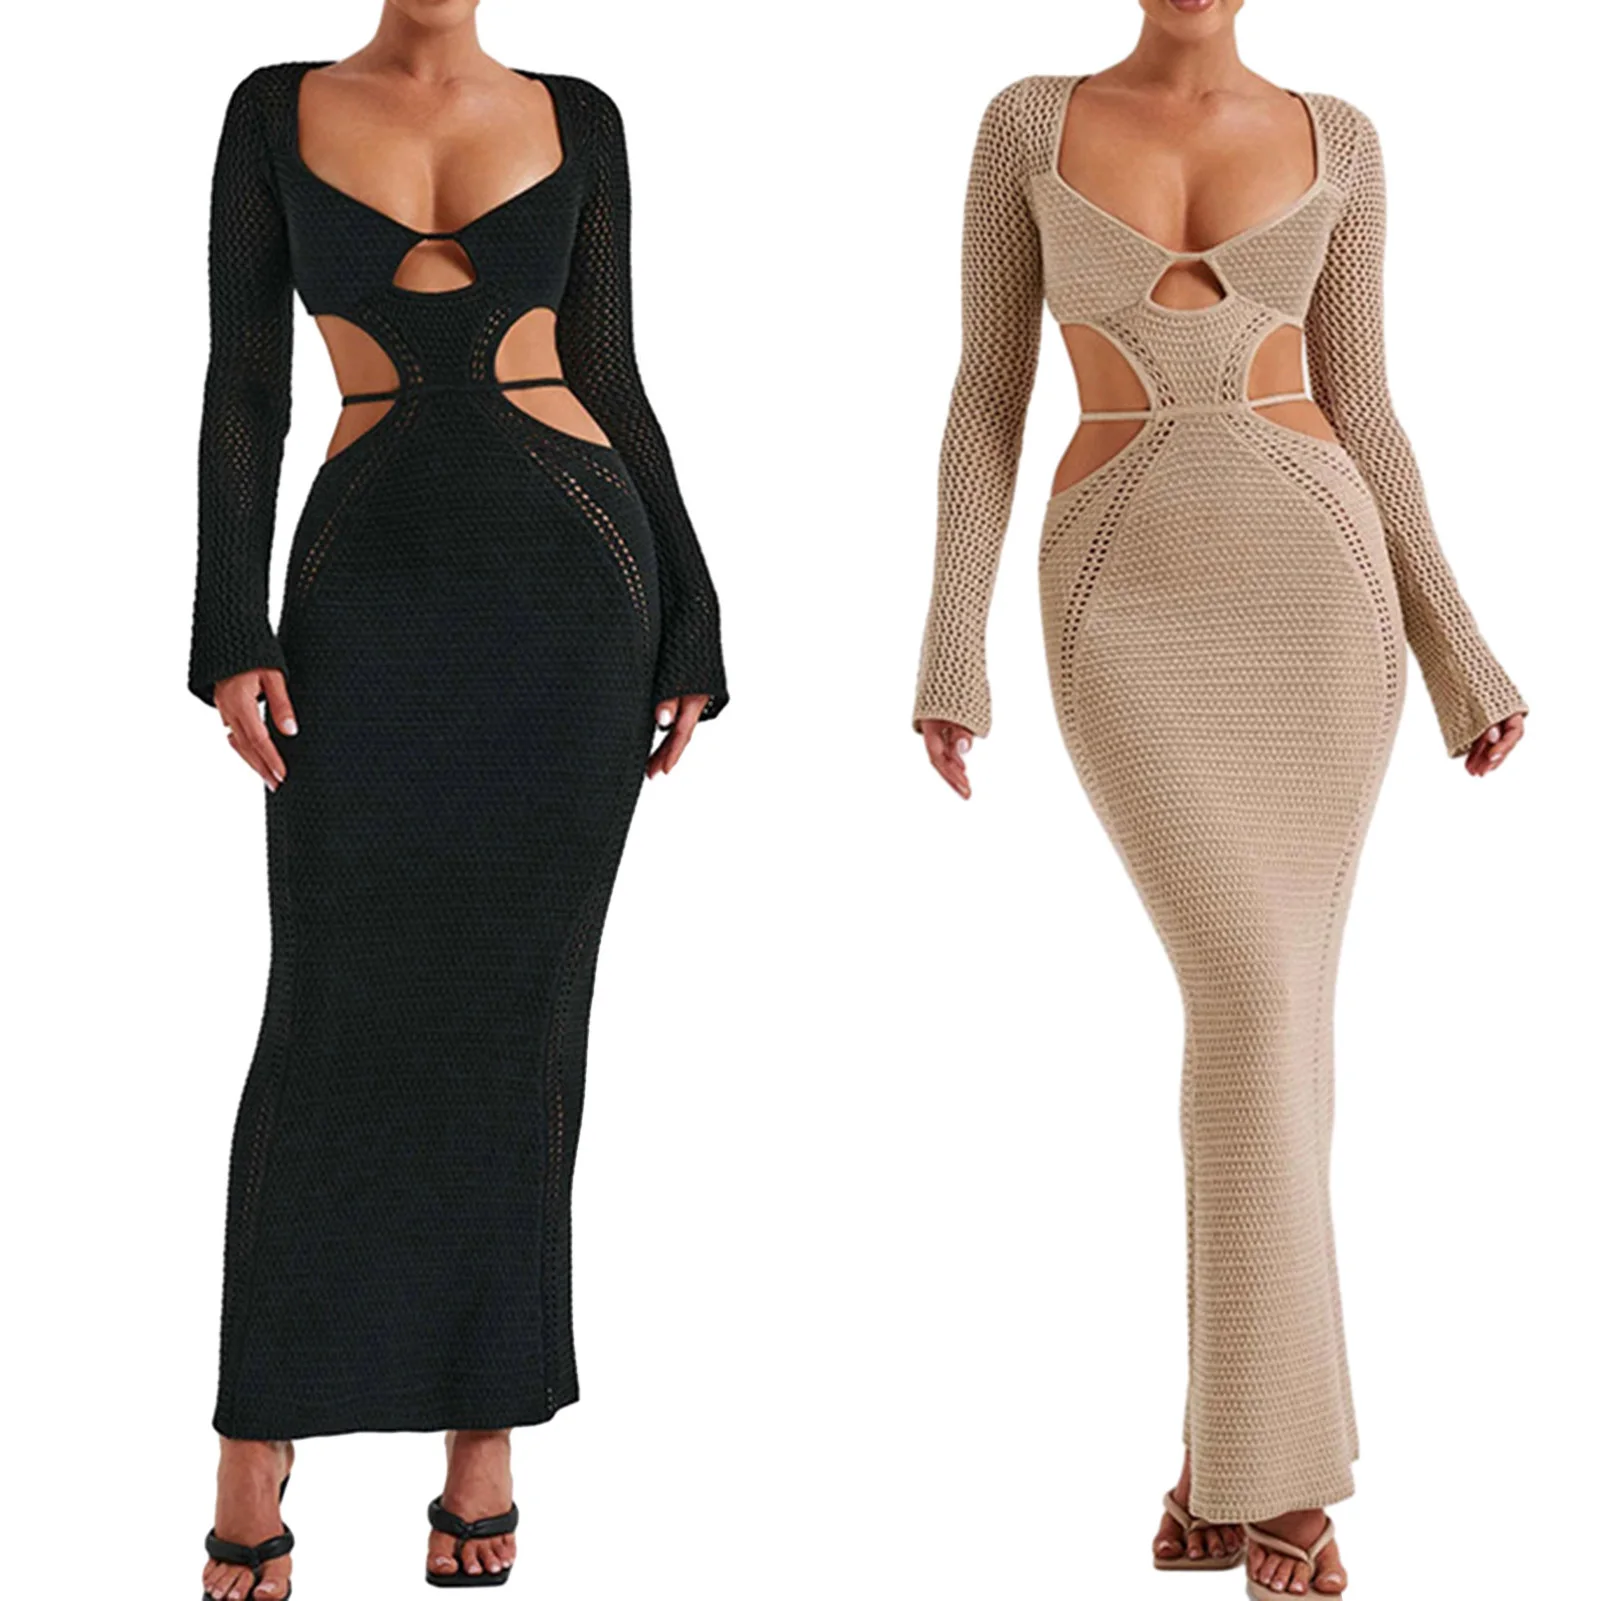 

Women Hollow Crochet Dress Elegant Sexy Backless Dress Slim Fit Knitted Sheer Dress Skinny Pullover Dress Cocktail Party Dress